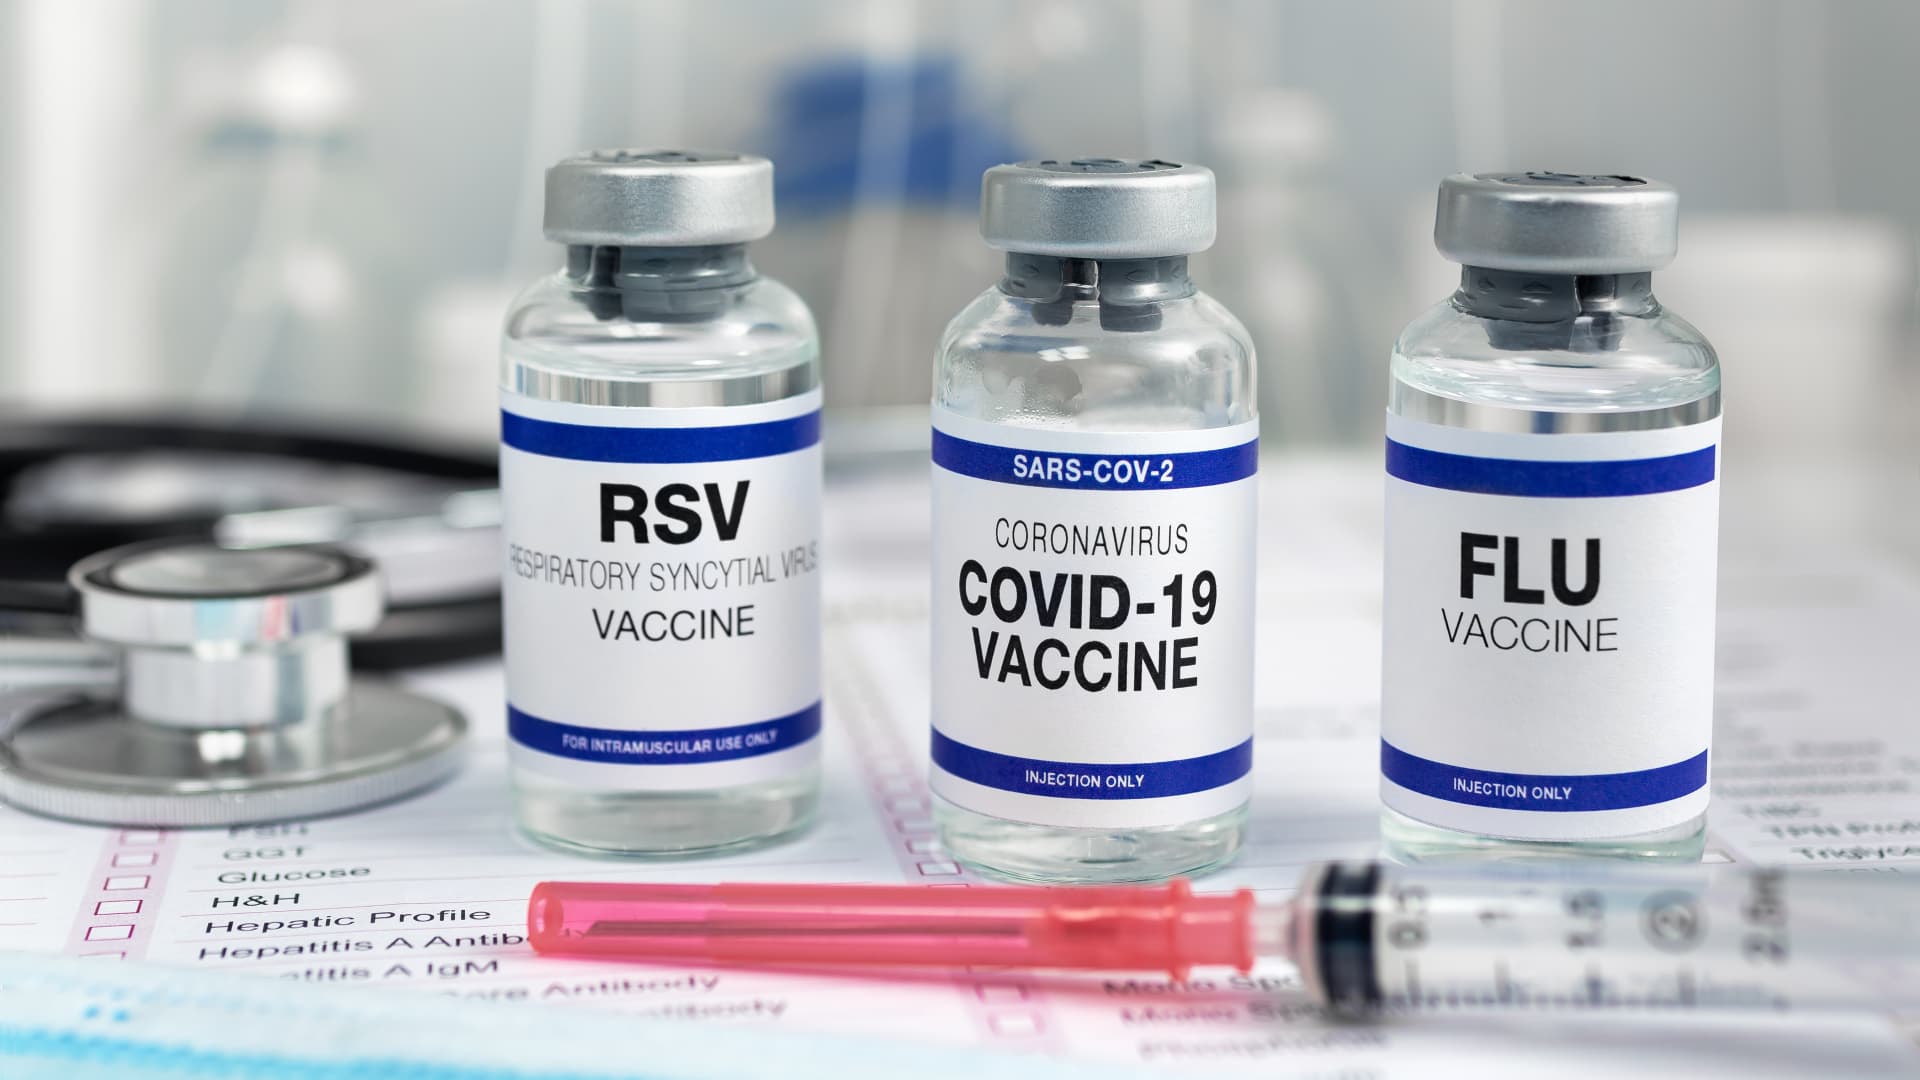 Bottles of vaccine for Influenza Virus, Respiratory Syncytial virus and Covid-19 for vaccination. Flu, RSV and Sars-cov-2 Coronavirus vaccine vials in the medical clinic